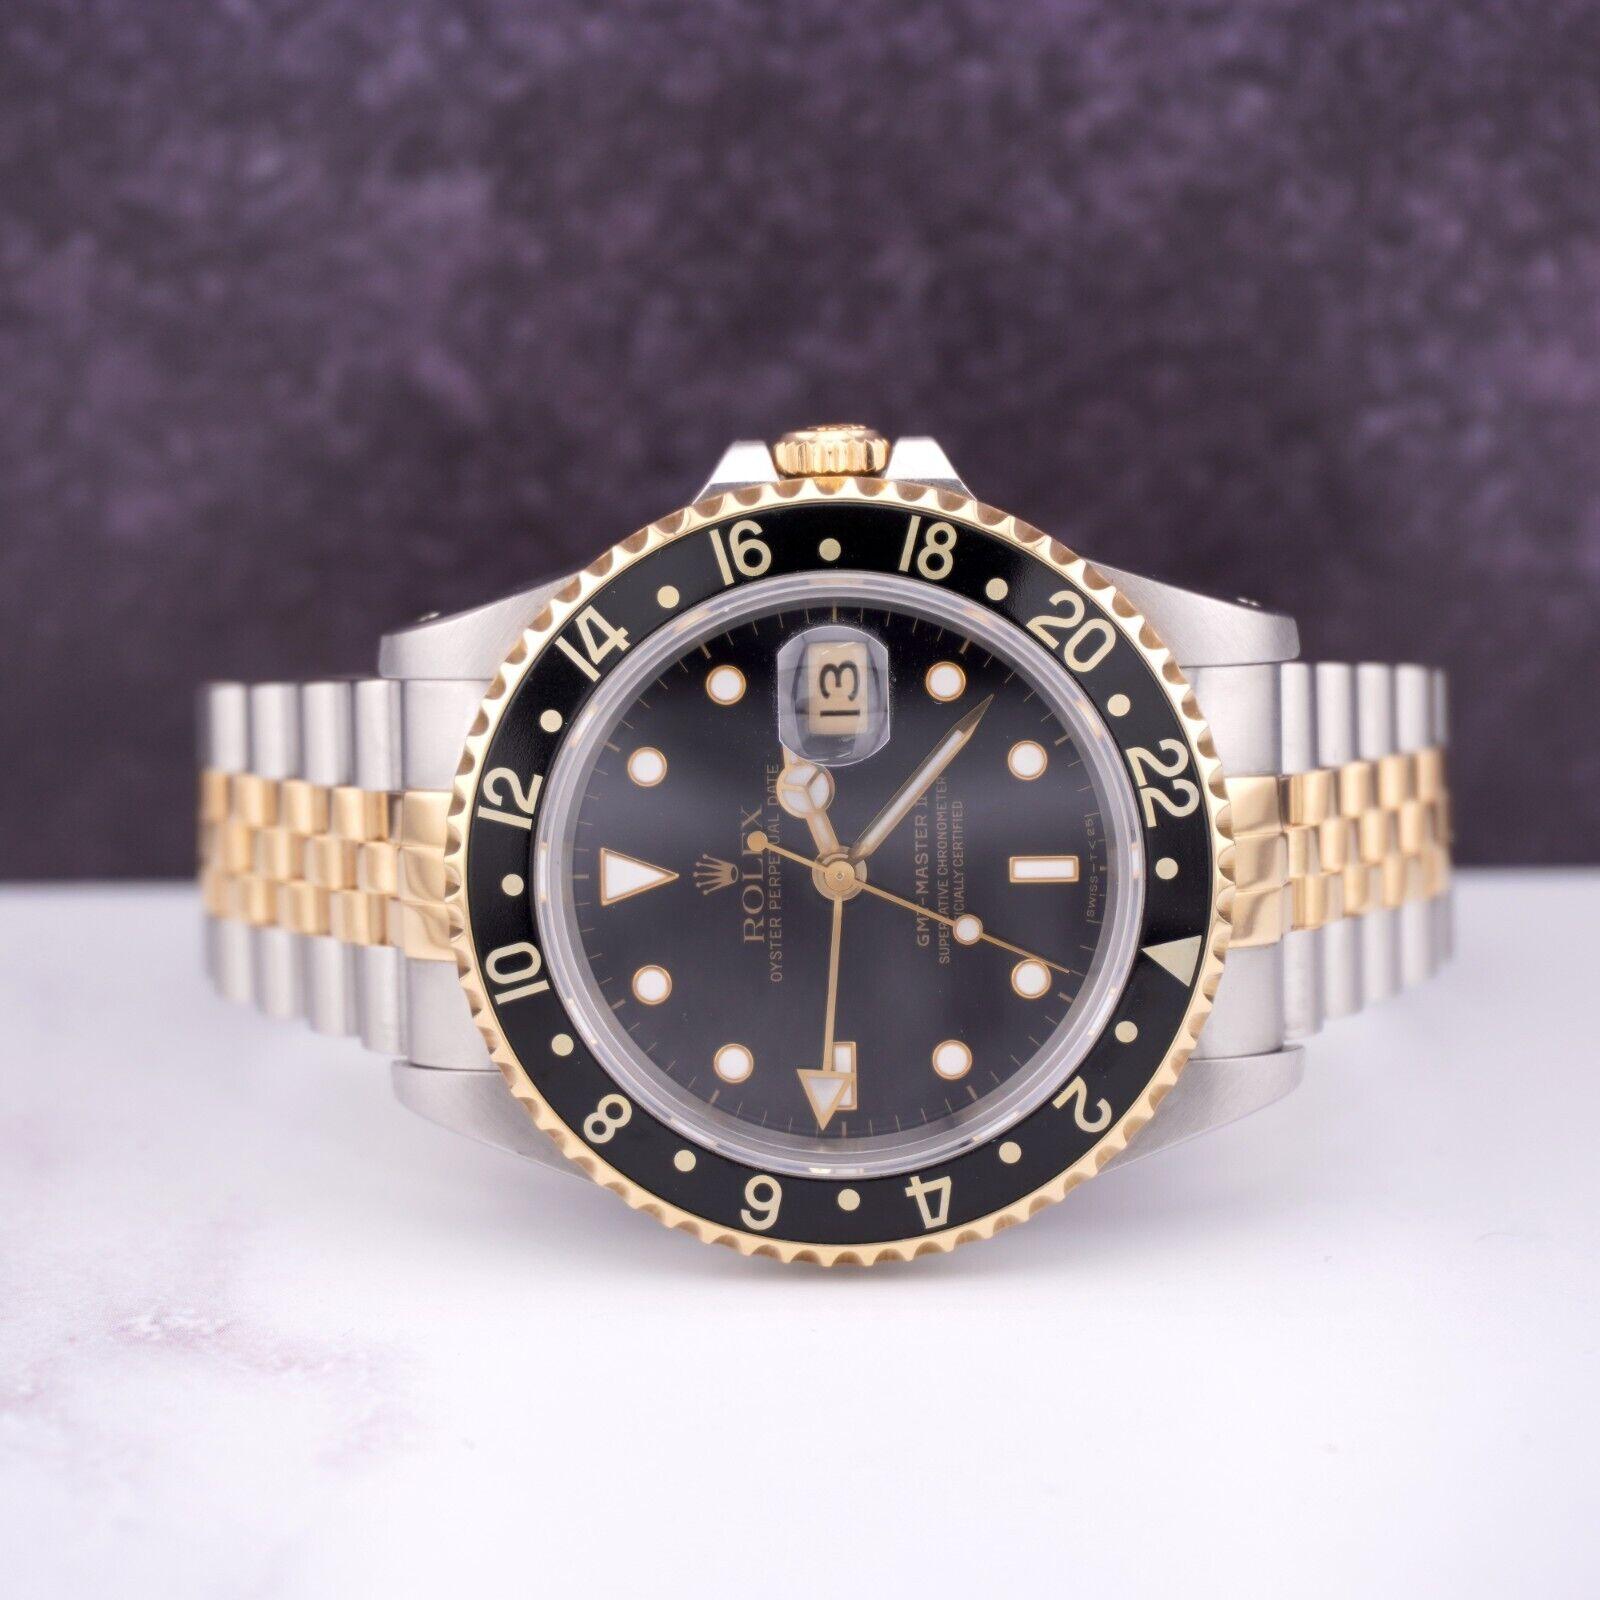 Rolex GMT Master ll 40mm Watch

Pre-owned w/ Original Box & Paper
100% Authentic Authenticity Card
Condition - (Great Condition) - See Pics
Watch Reference - 16713
Model - GMT-Master II
Dial Color - Black
Material - 18k Yellow Gold/Stainless